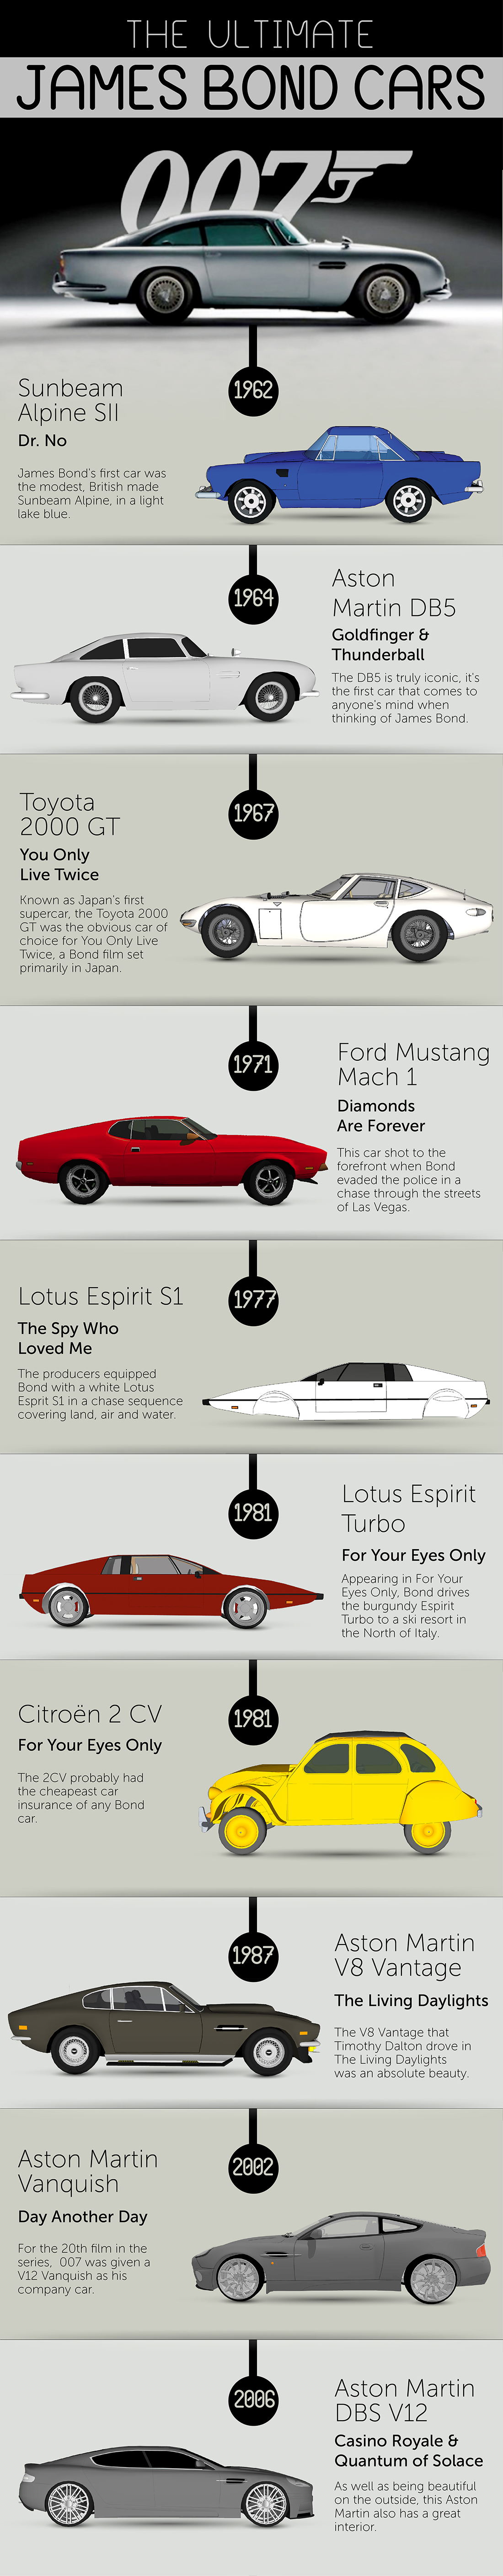 The Ultimate James Bond Cars